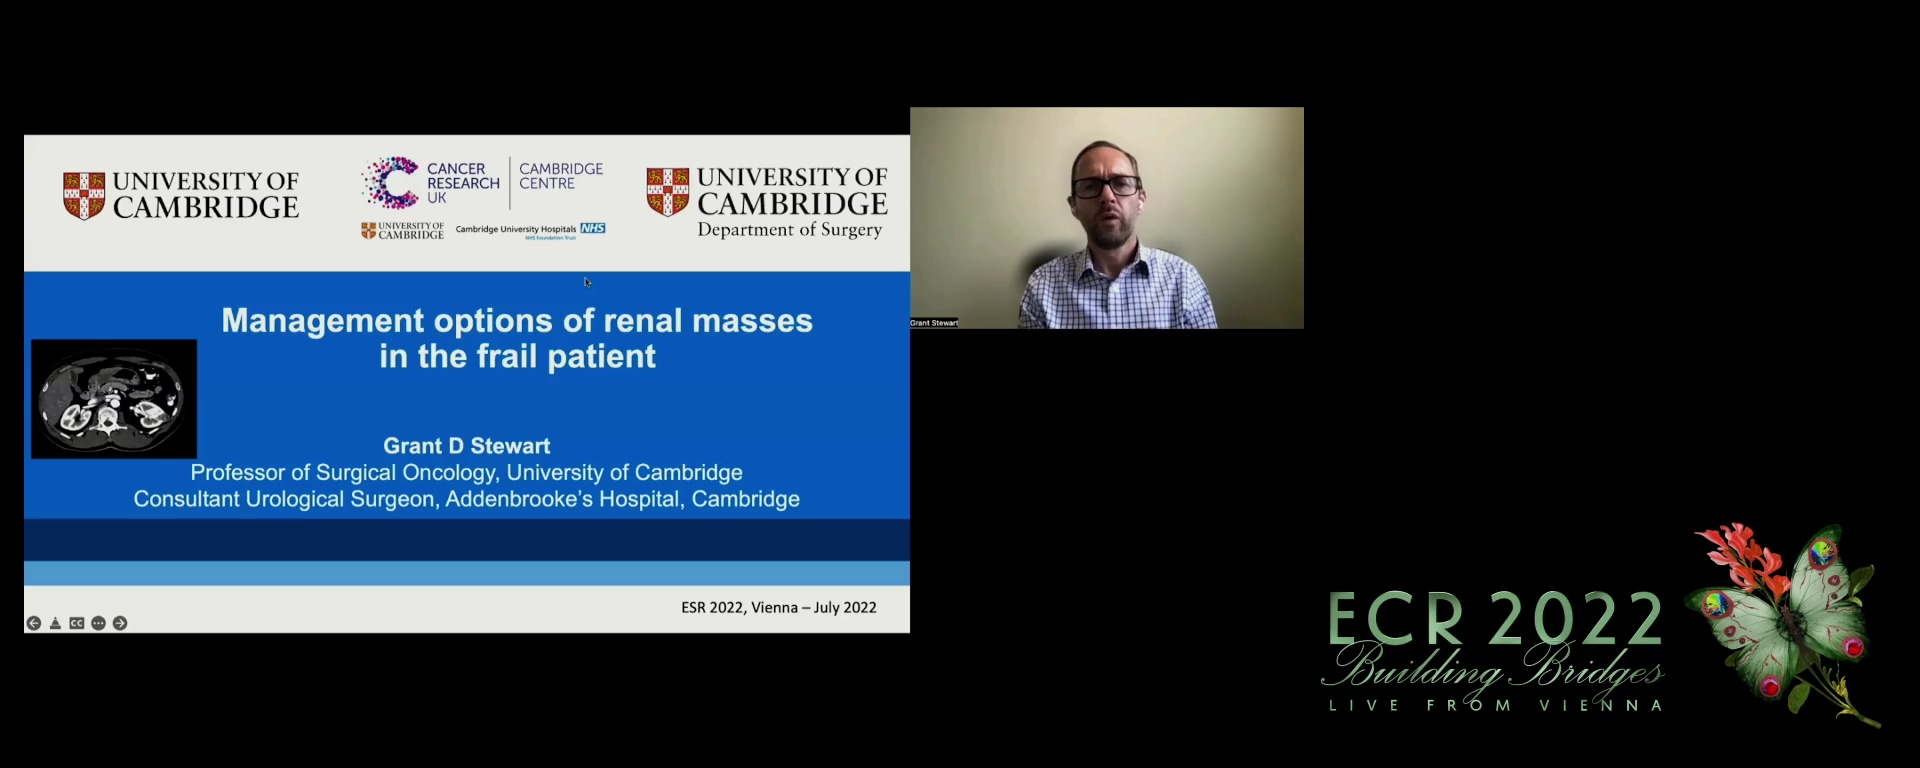 Management options of renal masses in the frail patient - Grant Stewart, Cambridge / UK